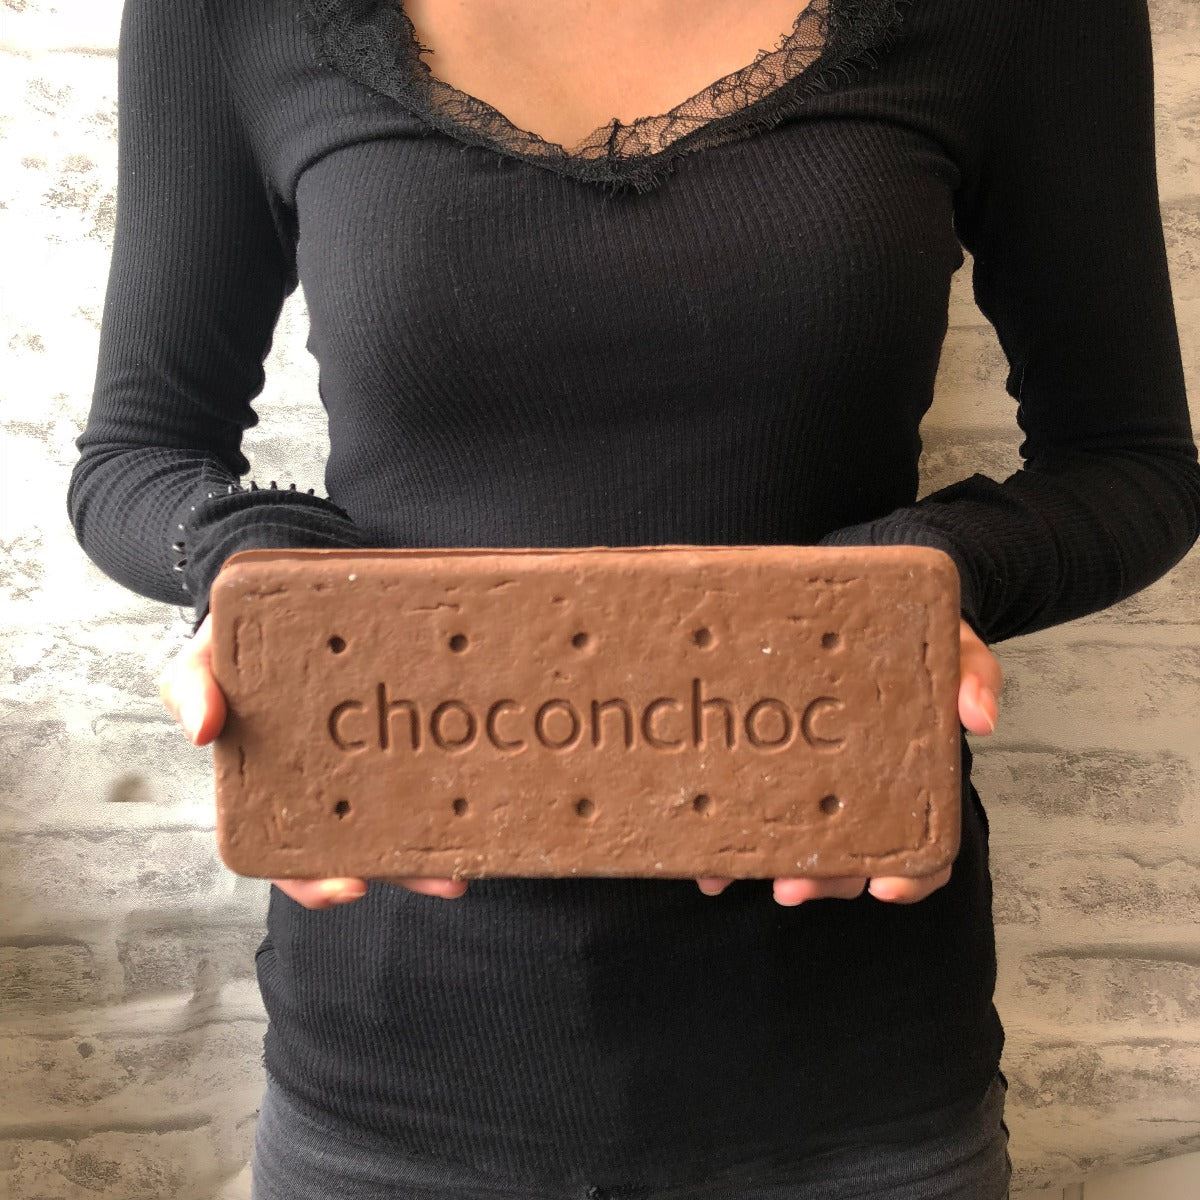 Giant Bourbon Biscuit Shaped Chocolate